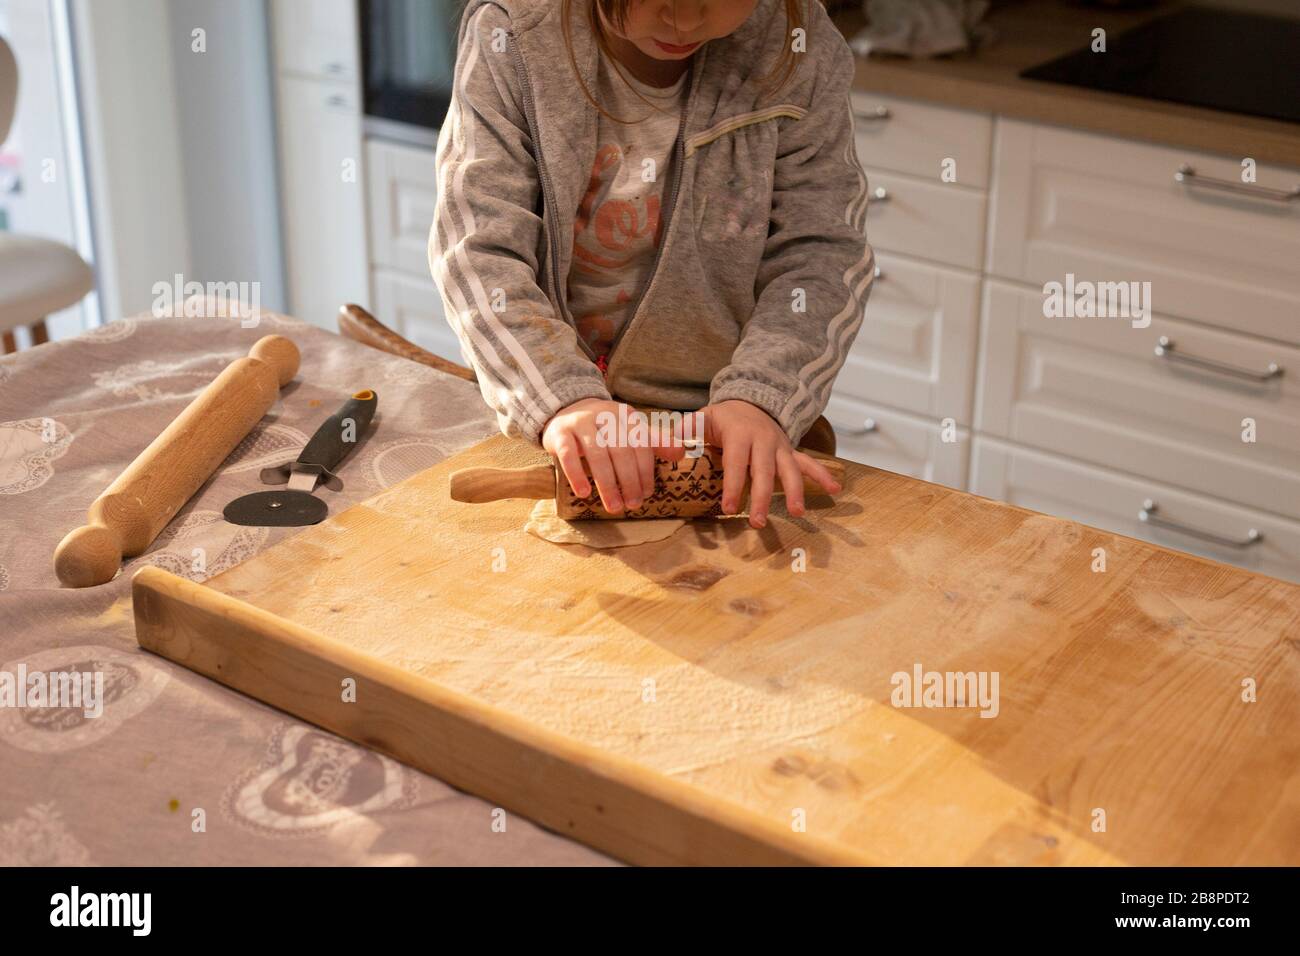 Child girl in white kitchen flattening pizza dough with a small rolling pin on a wooden board. Lockdown activity idea. Stock Photo